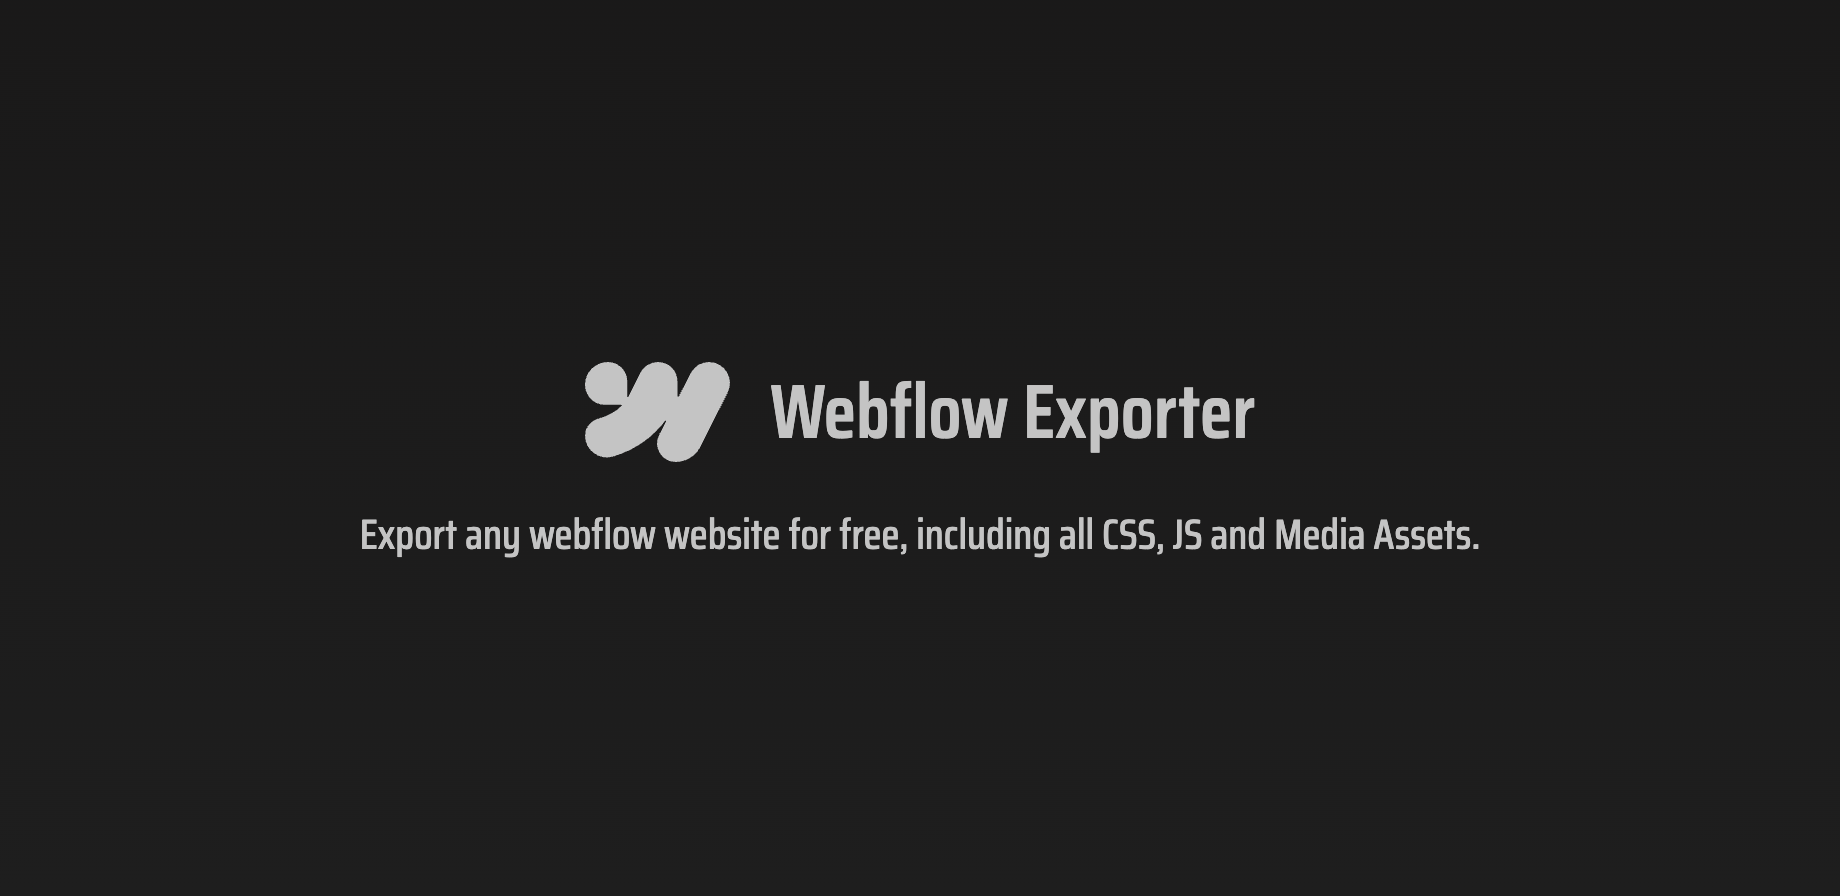 Webflow-Exporter — Tool to Export a Webflow Website for Free